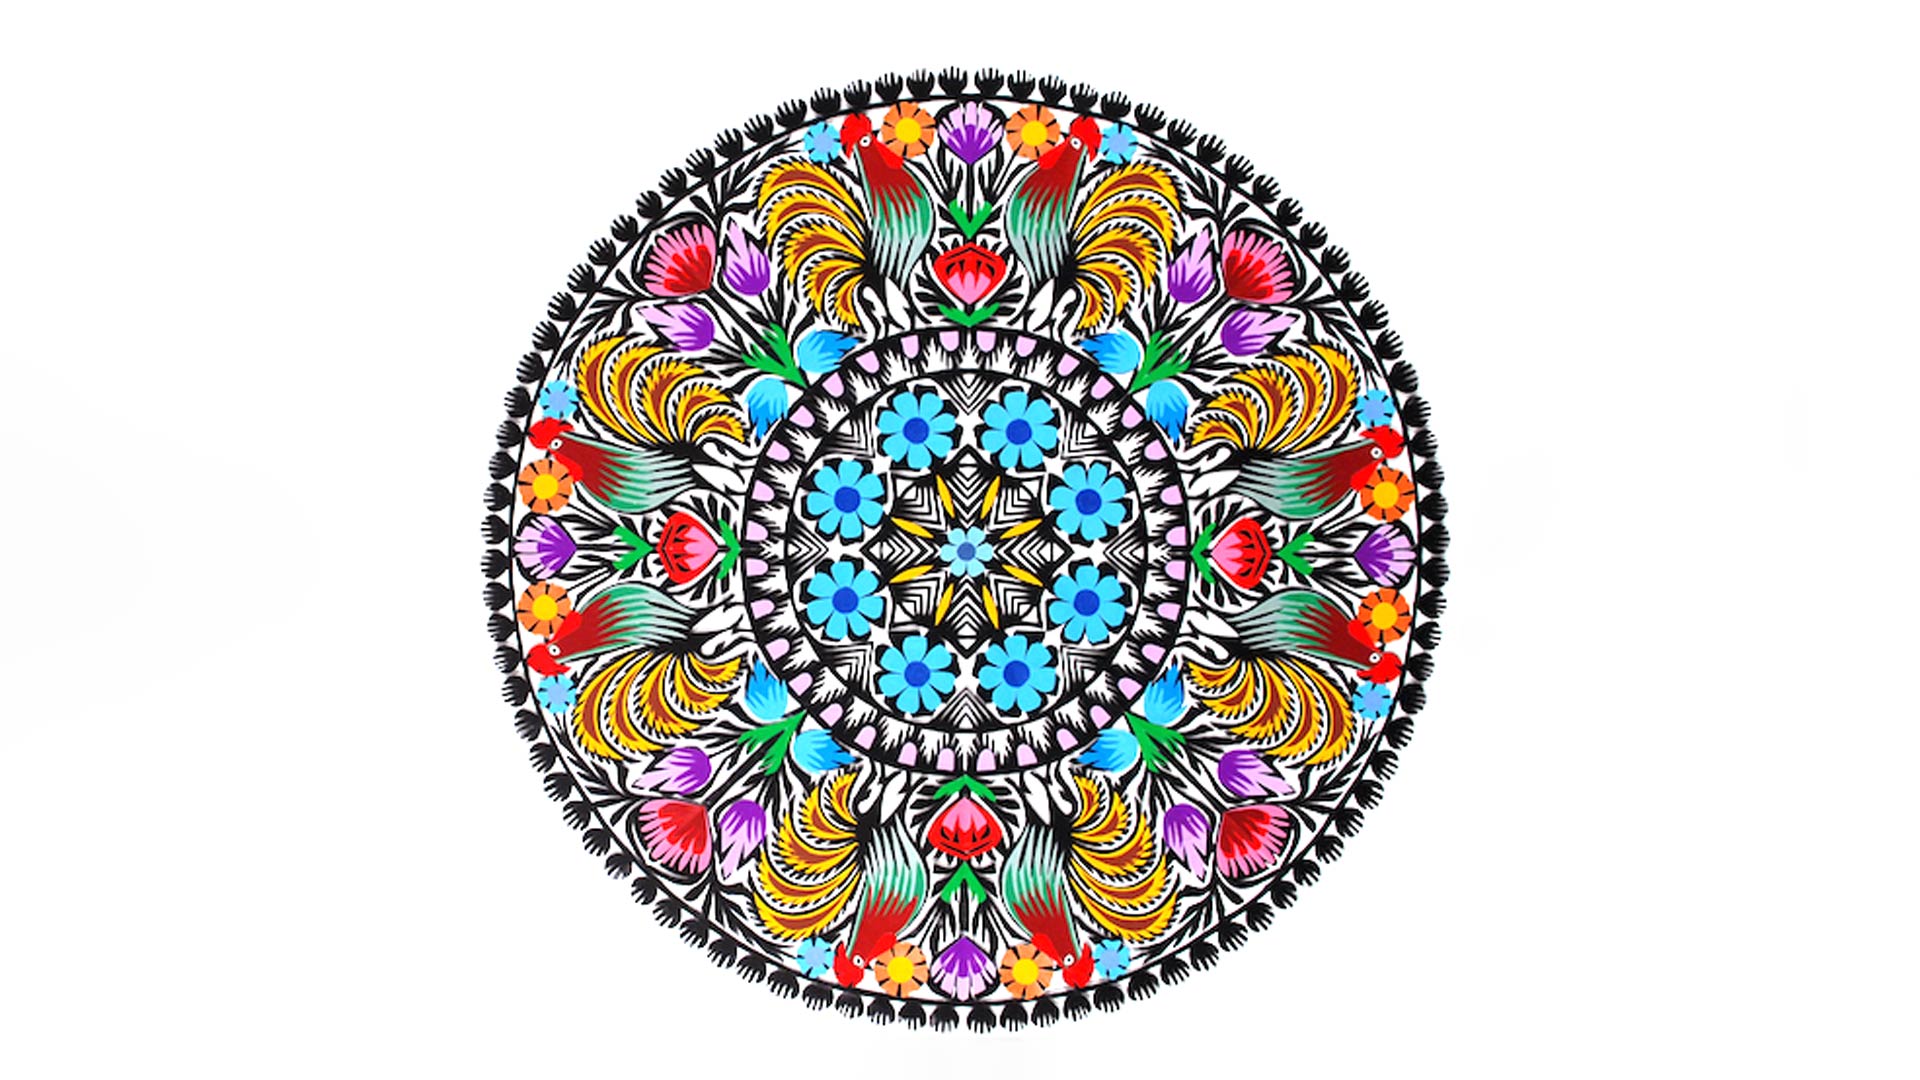 /img/colorful geometric designs arranged in a circle